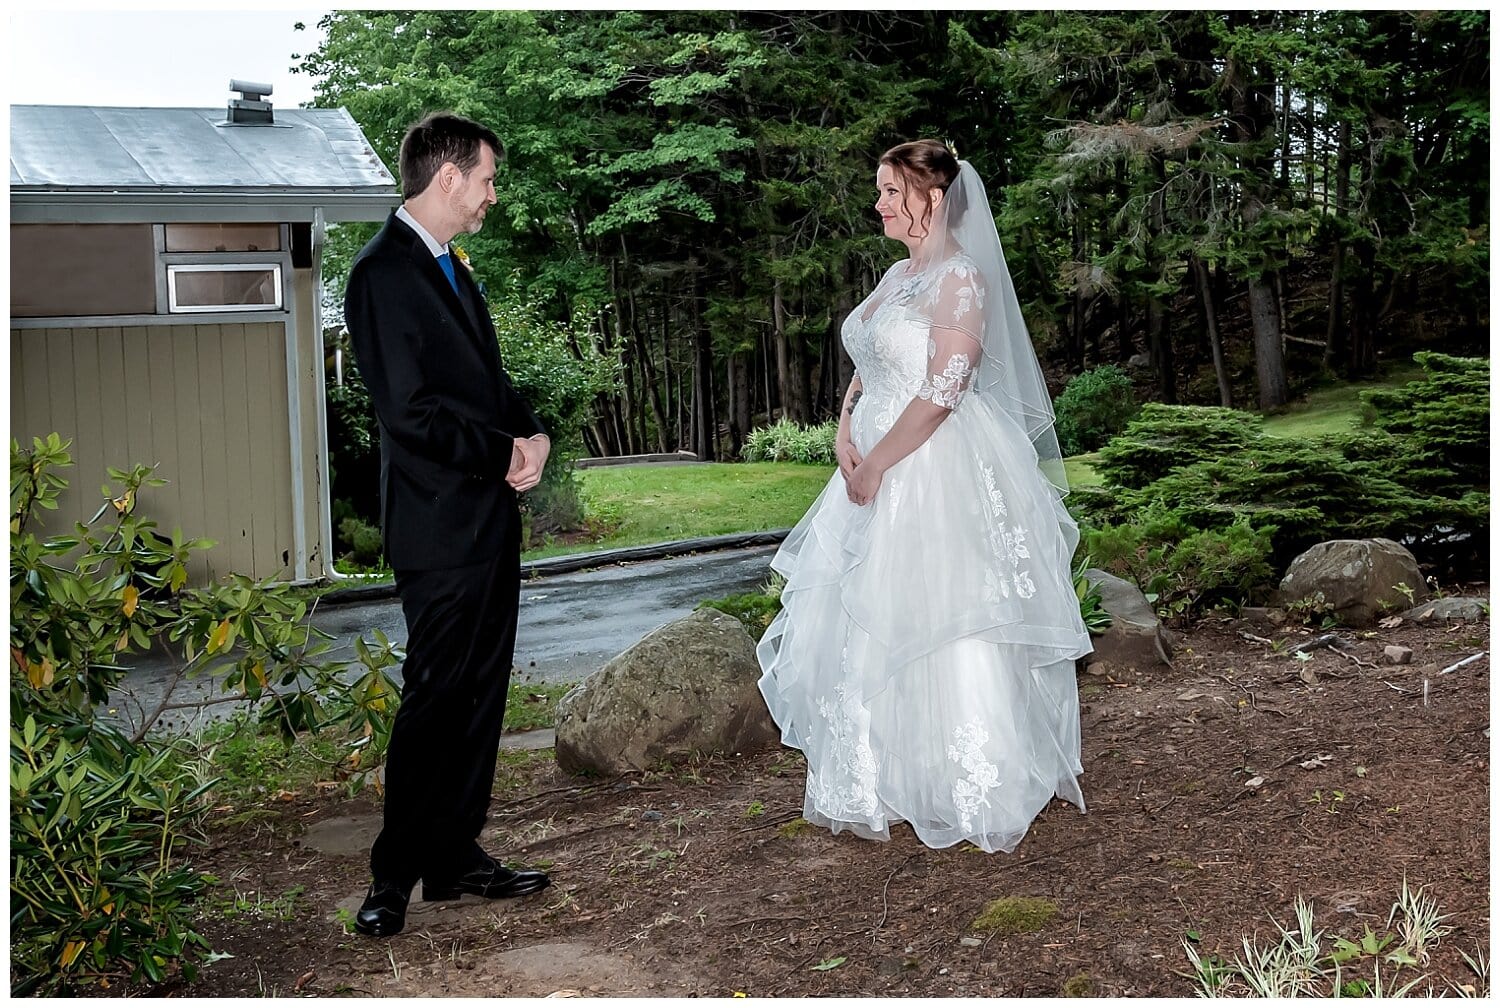 The bride and groom share their first look before their wedding ceremony at Saraguay House in Halifax.